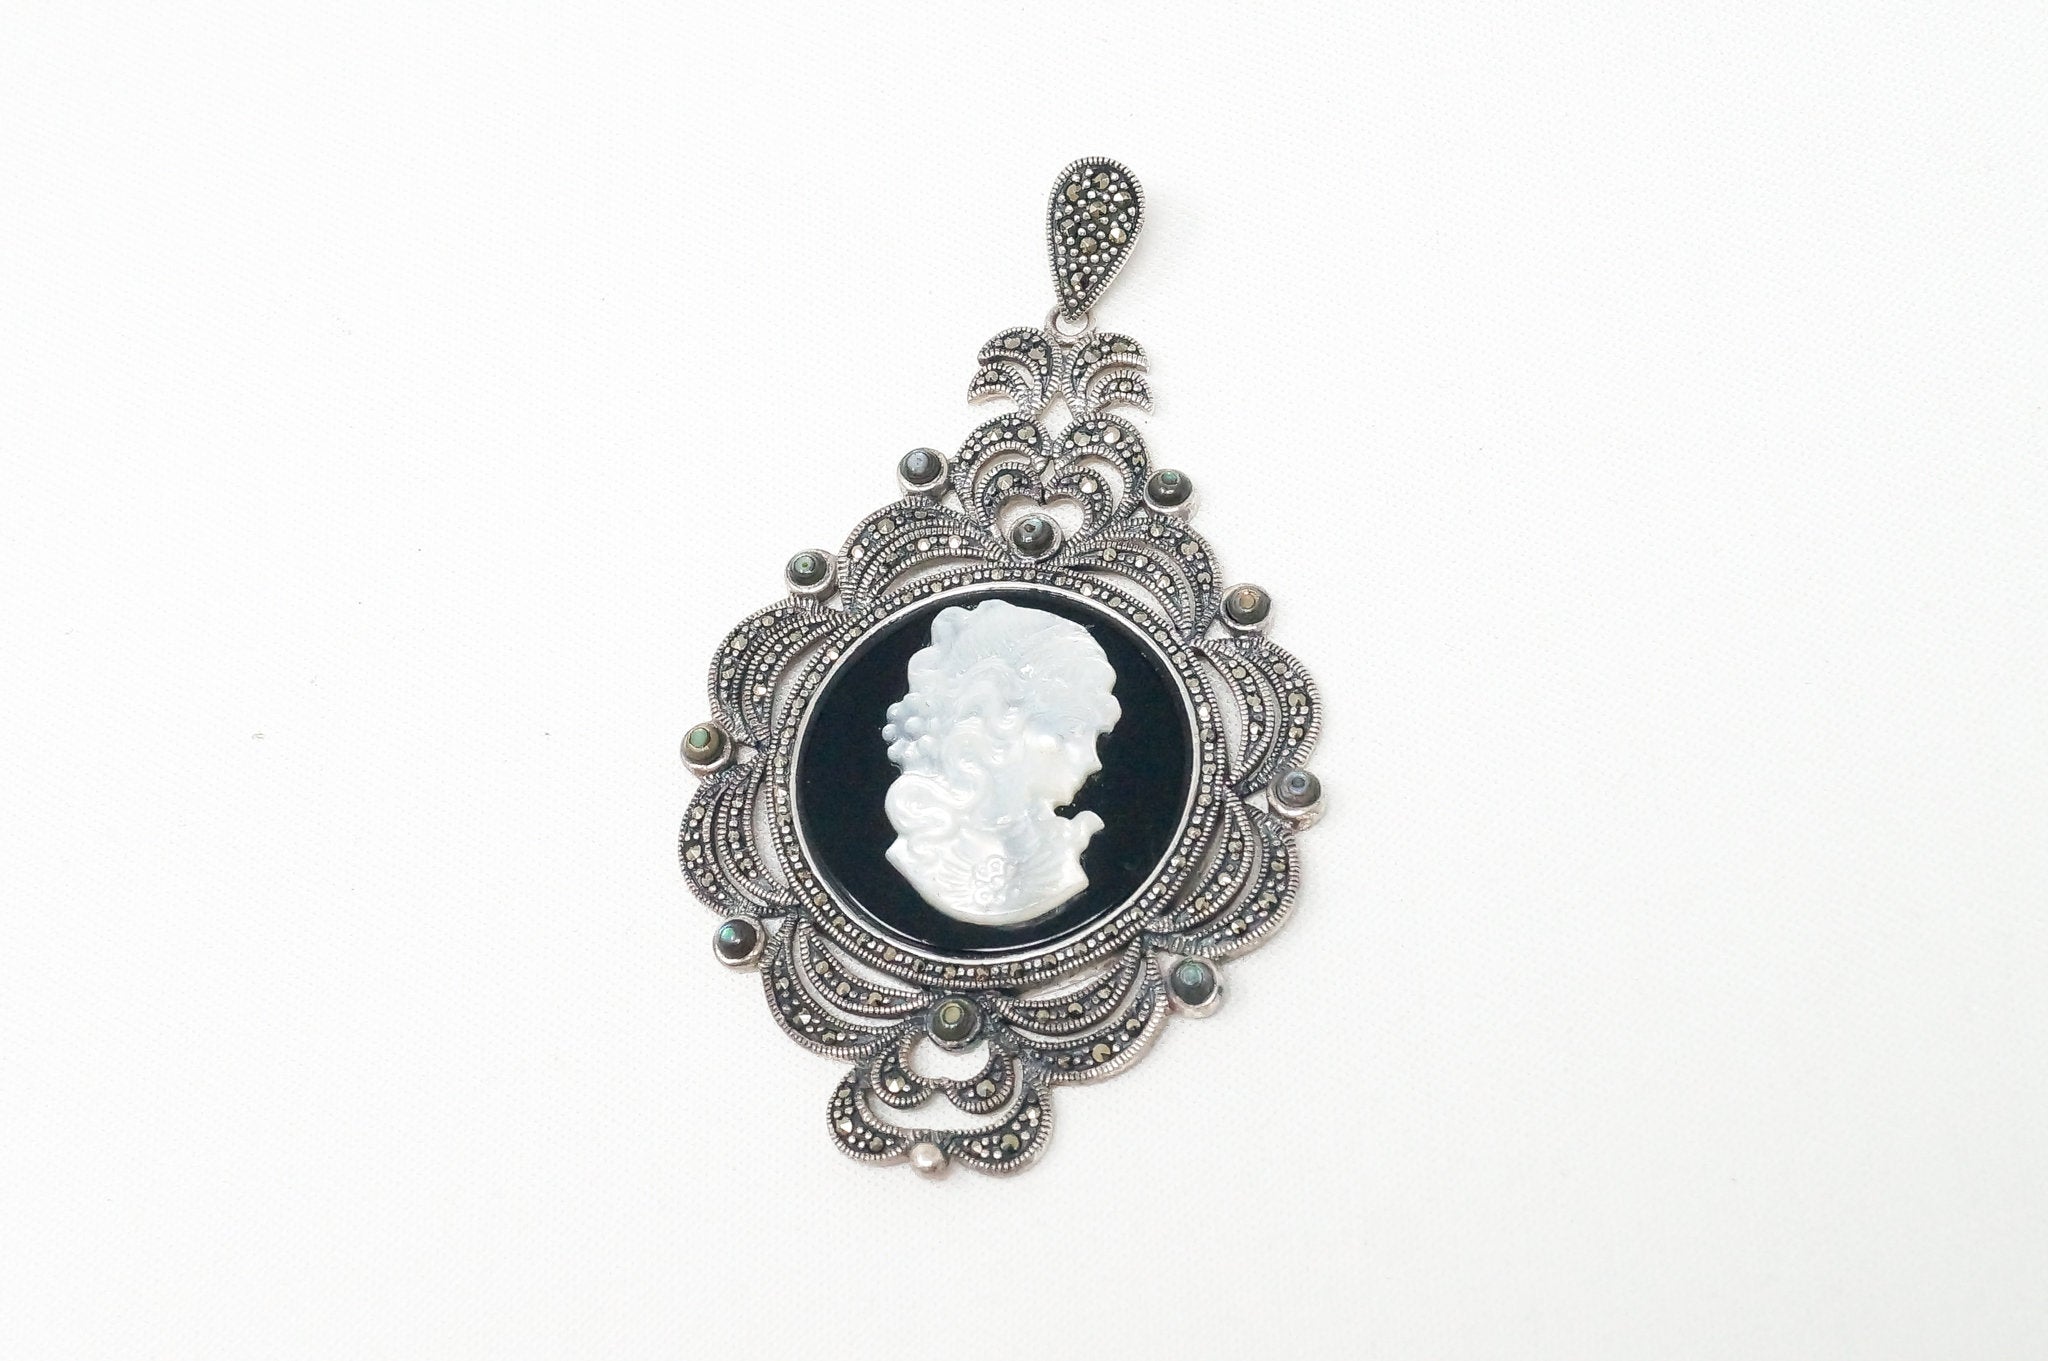 Vtg Carved Cameo Mother Of Pearl Marcasite Sterling Silver Necklace Pendant